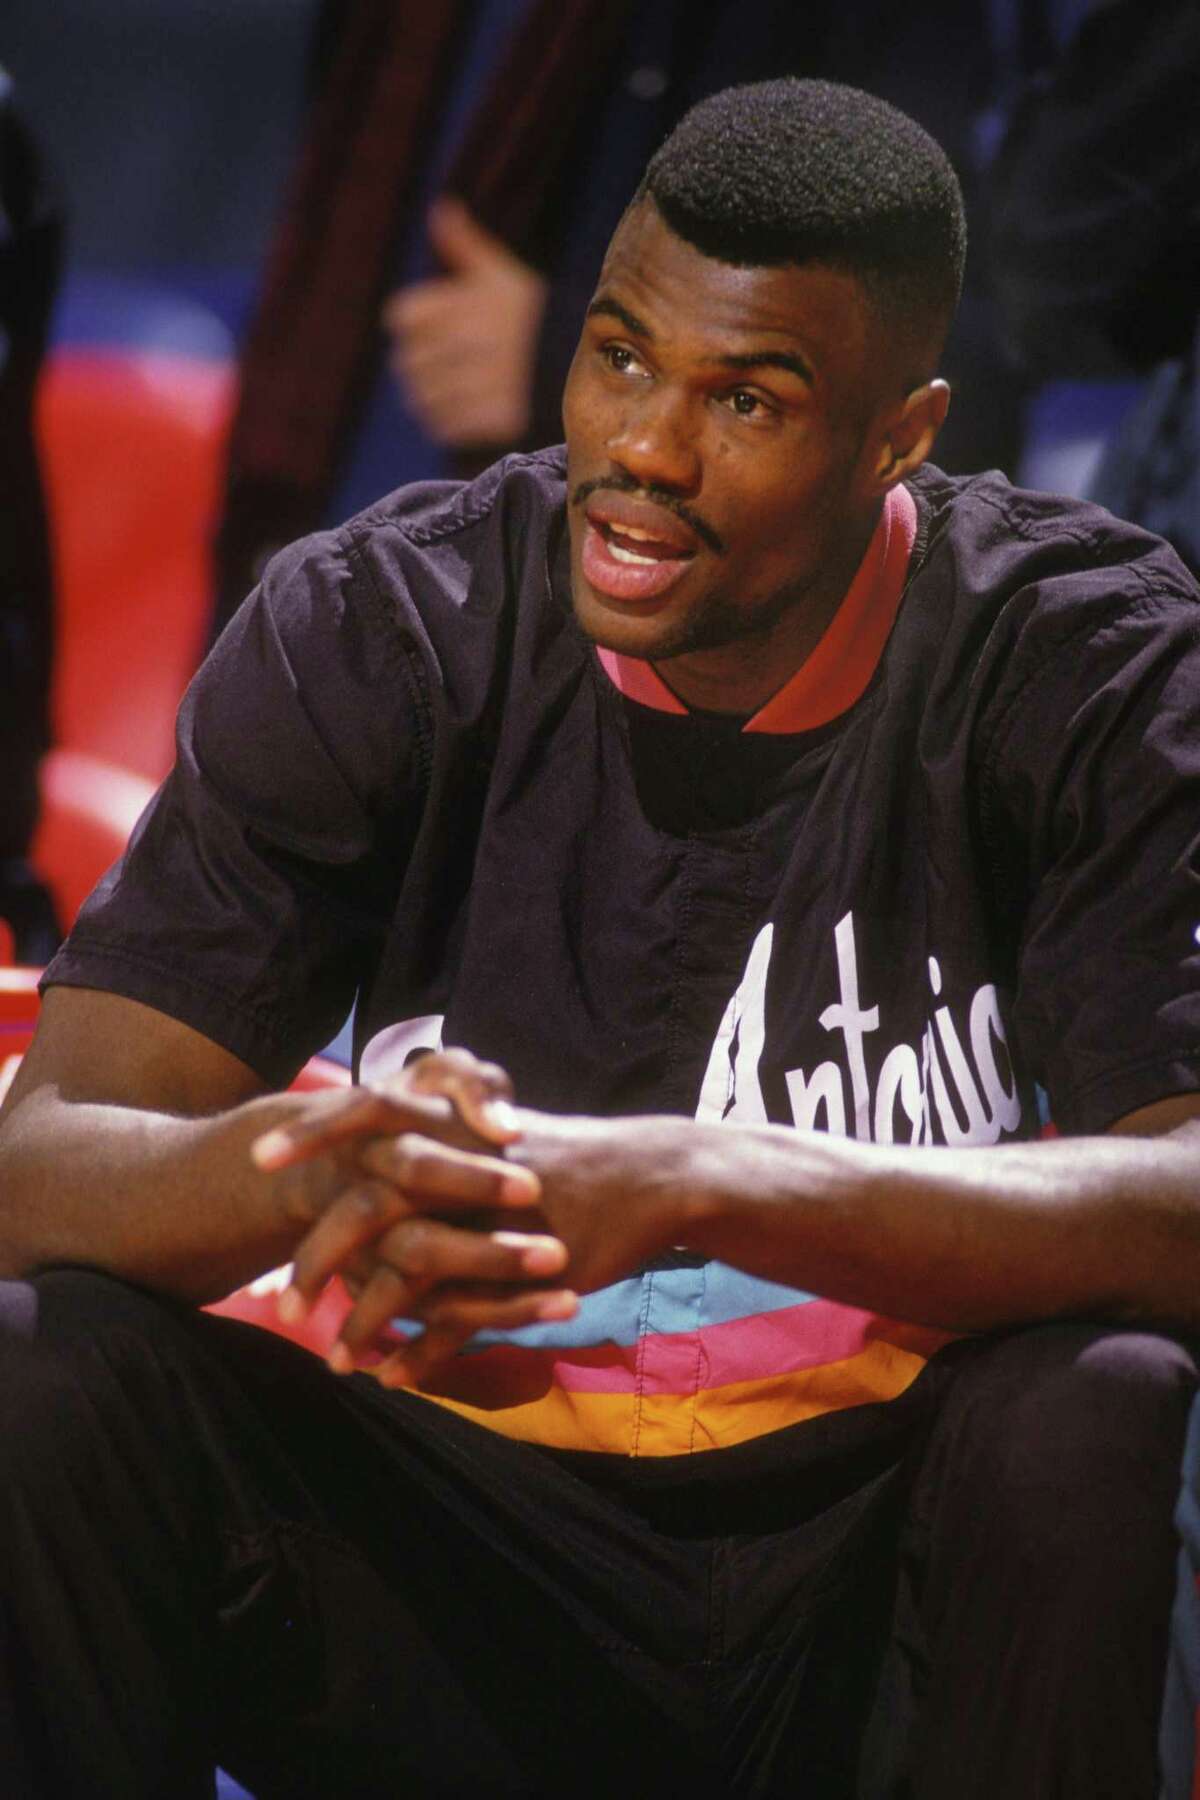 LANDOVER, MD - JANUARY 17: David Robinson #50 of the San Antonio Spurs before a NBA basketball game against the Washington Bullets at the U.S.Air Arena on January 17, 1994 in Landover, Maryland. (Photo by Mitchell Layton/Getty Images) LANDOVER, MD - JANUARY 17: David Robinson #50 of the San Antonio Spurs before a NBA basketball game against the Washington Bullets at the U.S.Air Arena on January 17, 1994 in Landover, Maryland. (Photo by Mitchell Layton/Getty Images)